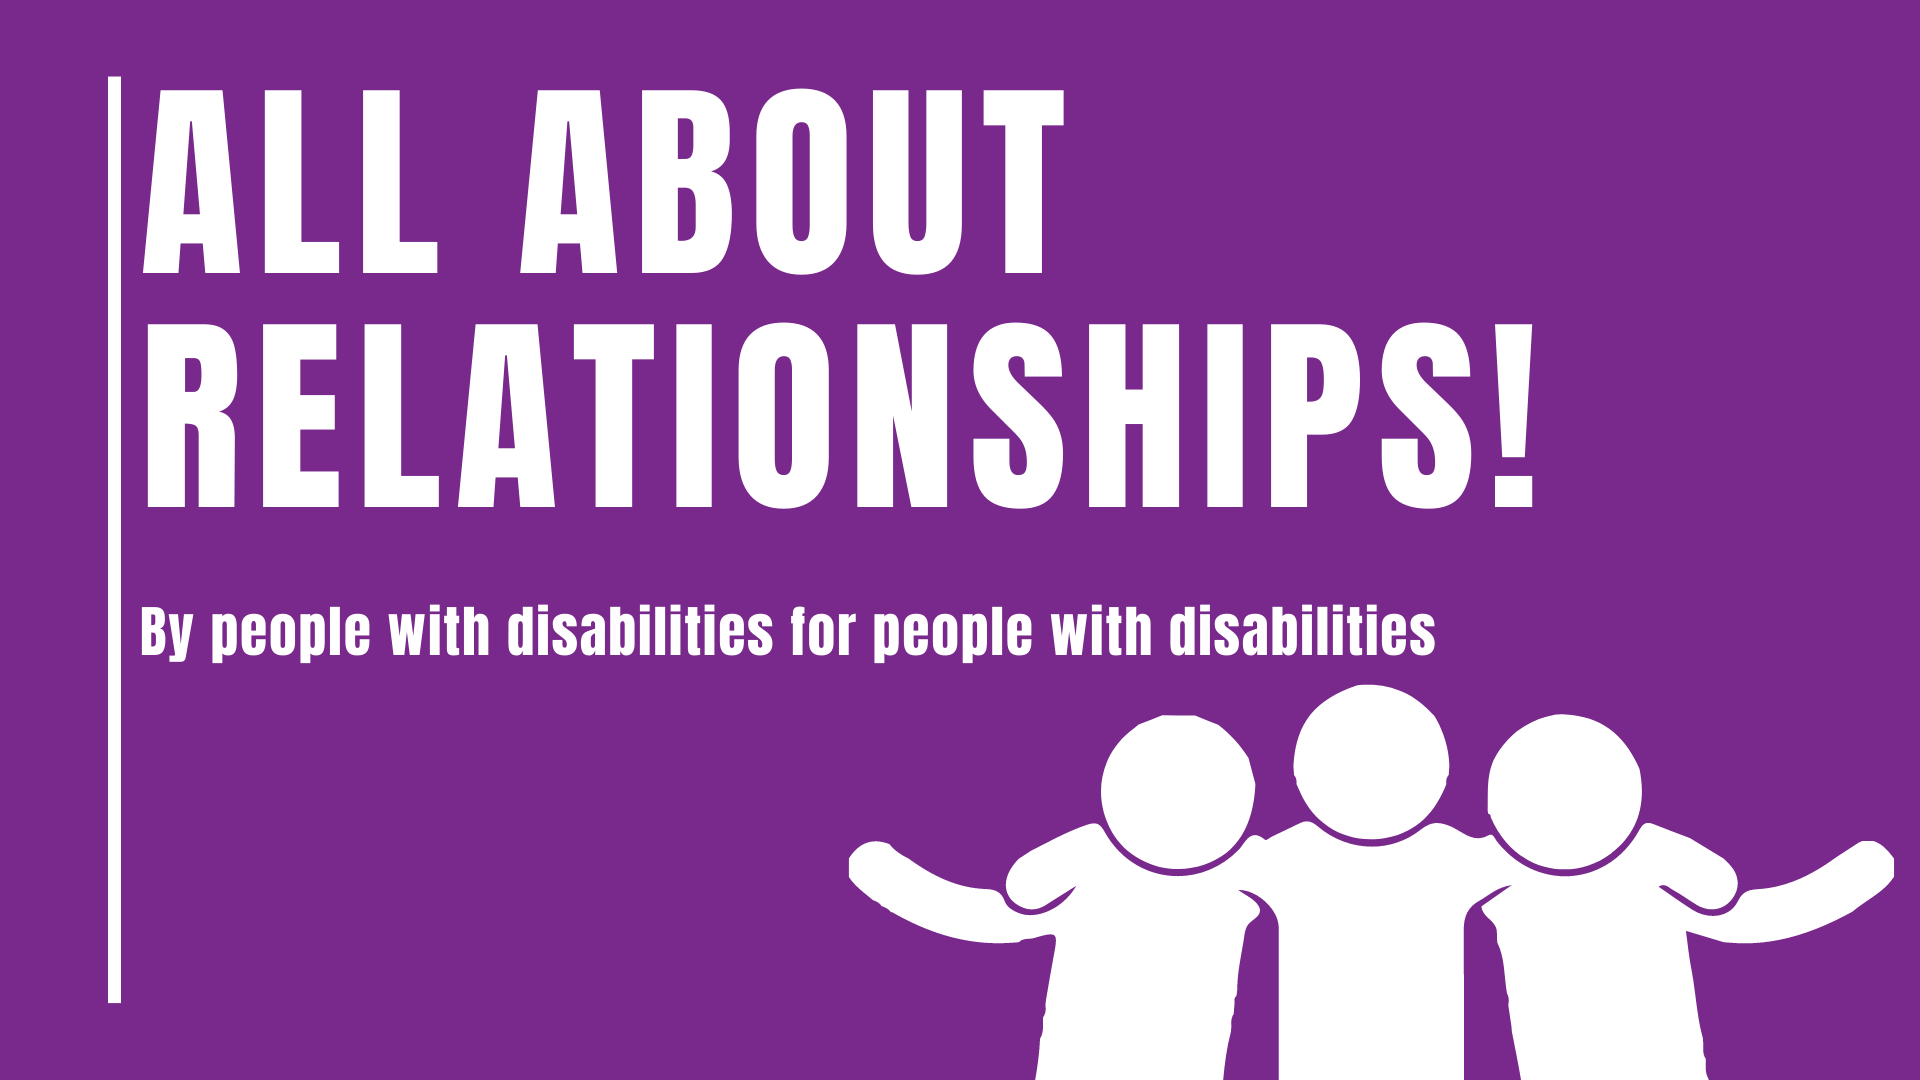 A purple banner with white text. Text reads All About Relationships! By People with Disabilities, For People with Disabilities! In the lower right corner there is a graphic of 3 figures. The one in the middle has their arms around the person on either side of them.